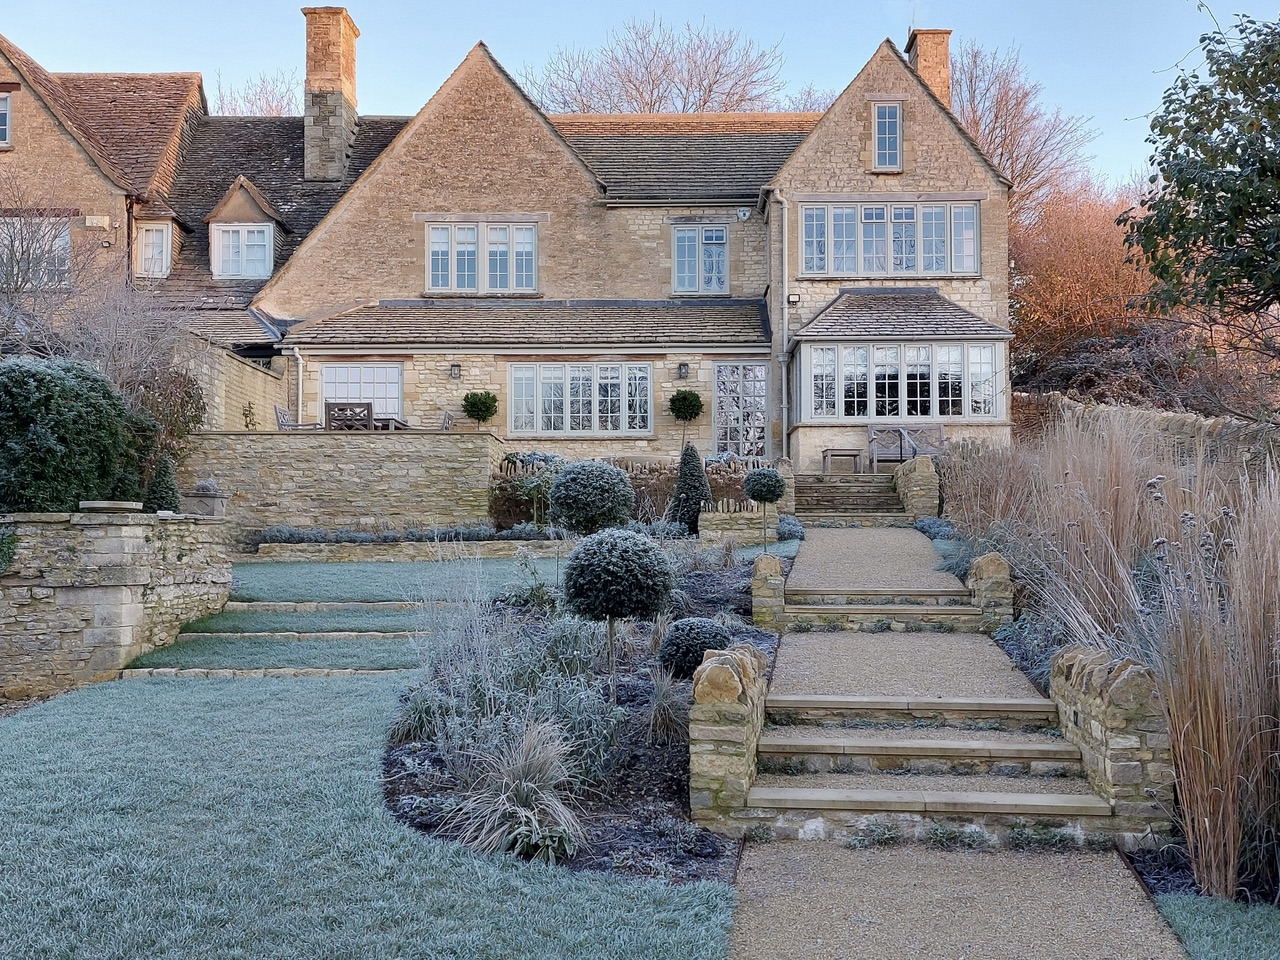 Morning frosty light over Filkins project by Hendy Curzon Gardens